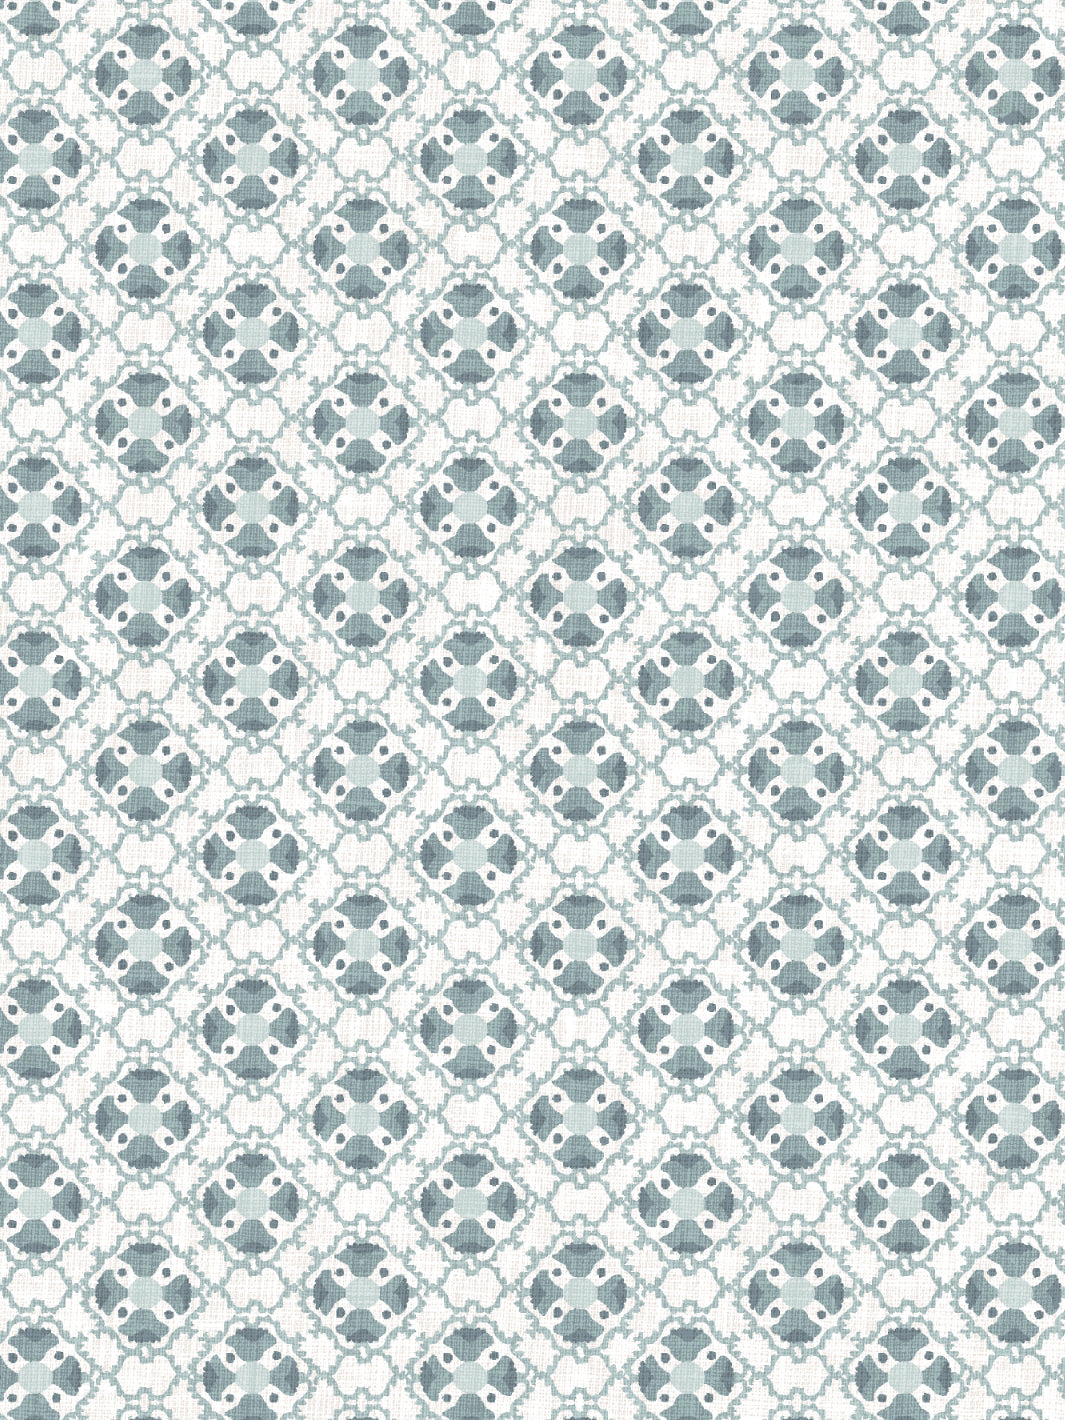 'Medallion All Over' Wallpaper by Nathan Turner - Seafoam